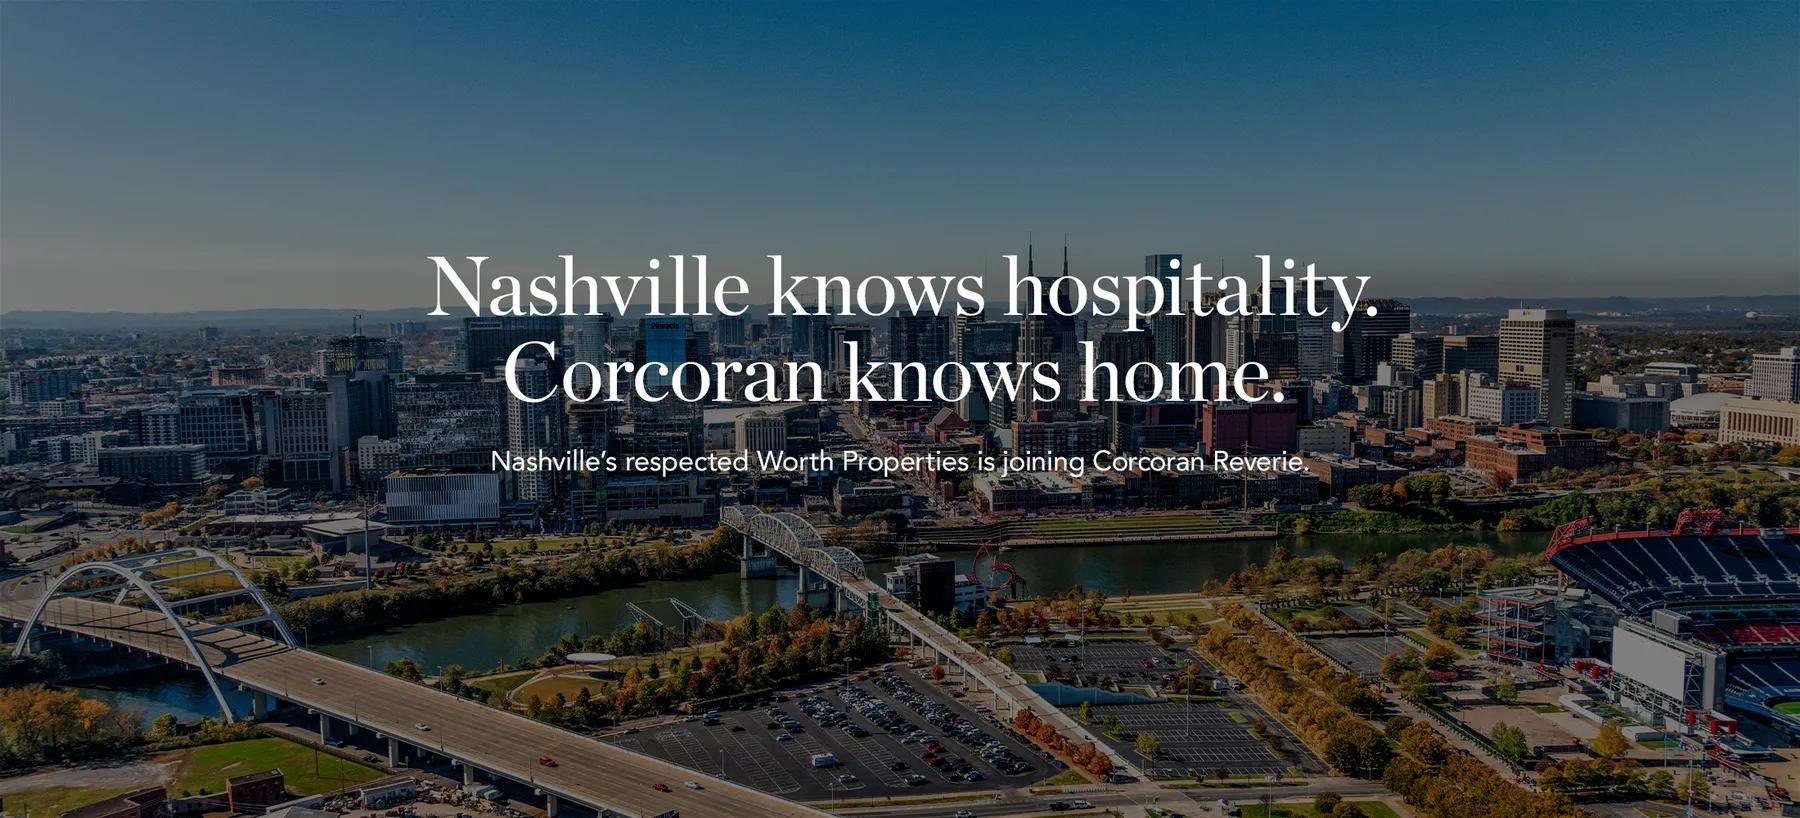 Nashville knows hospitality. Corcoran knows home. Nashville's respected Worth Properties is joining Corcoran Reverie.